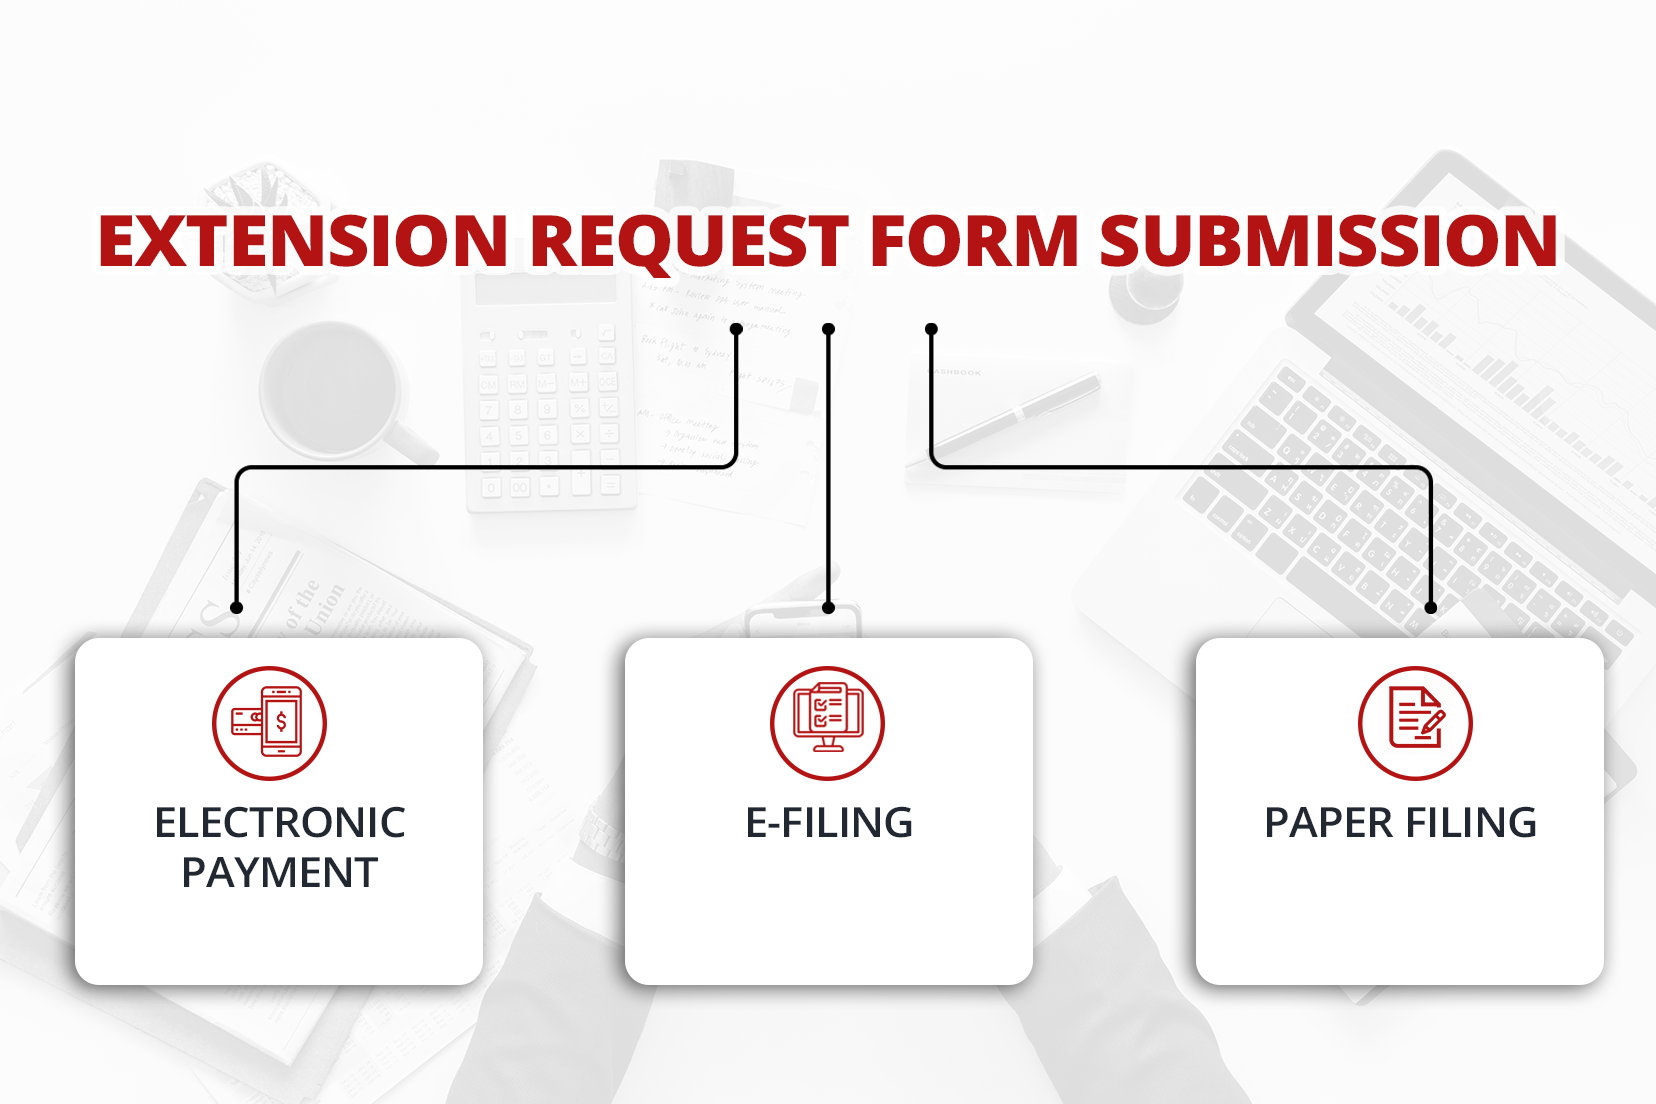 Extension form submission